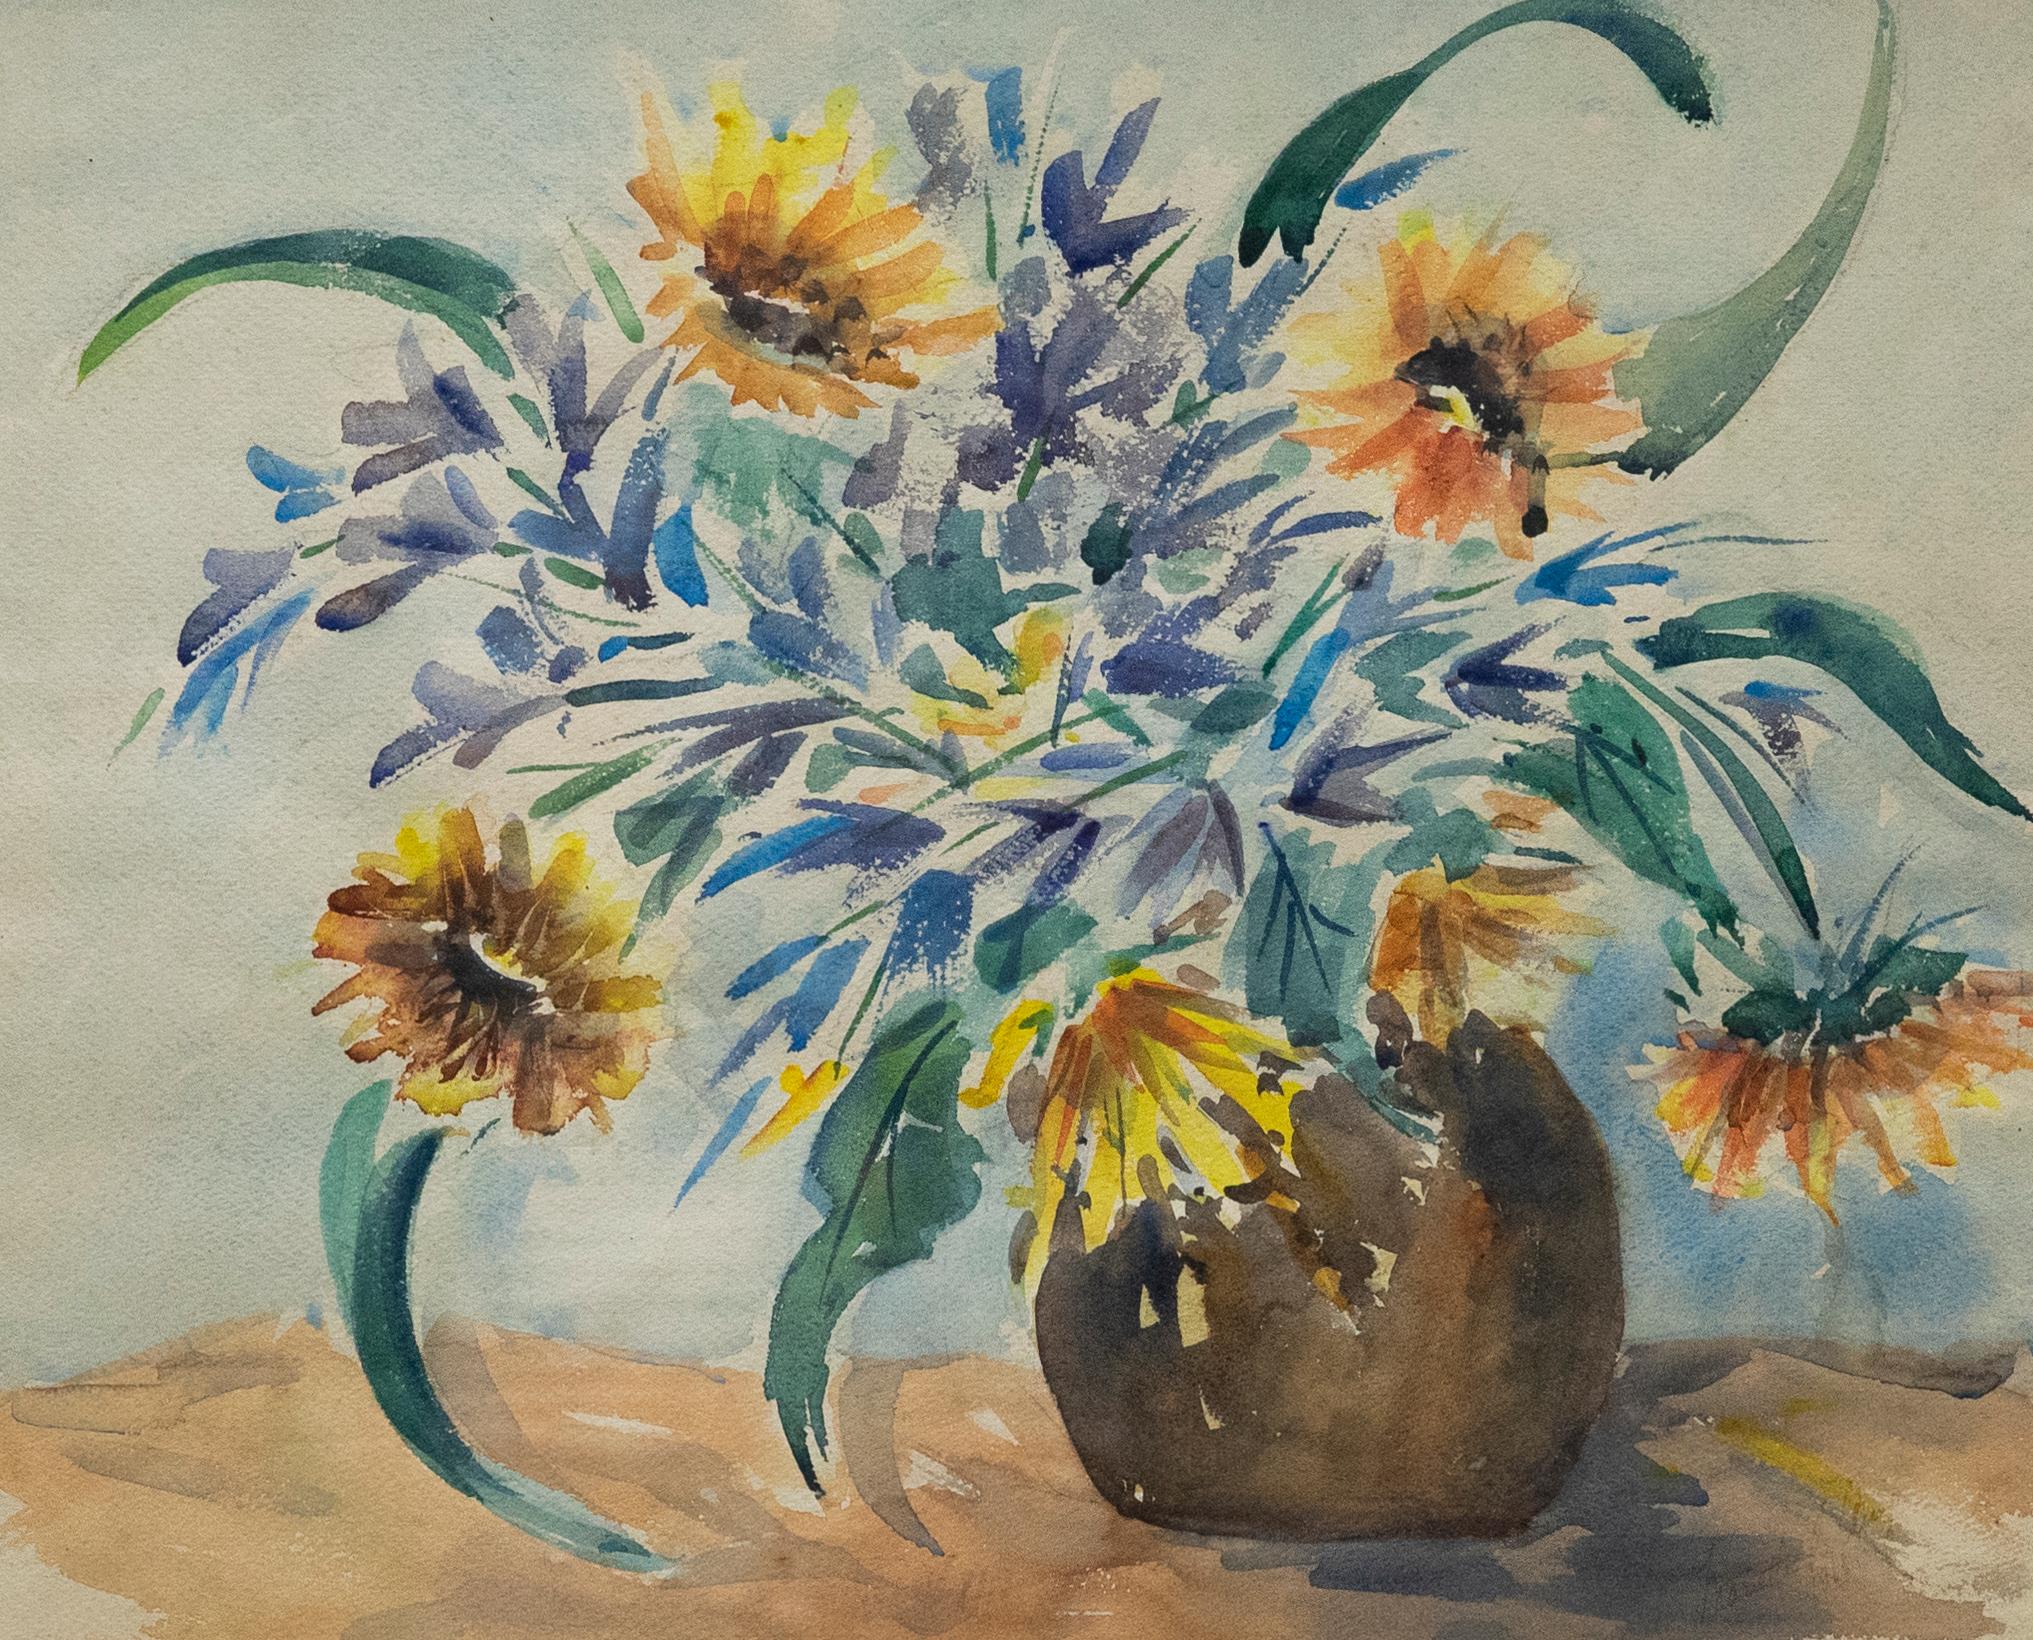 Framed 20th Century Watercolour - Sunflowers & Salvias - Art by Unknown